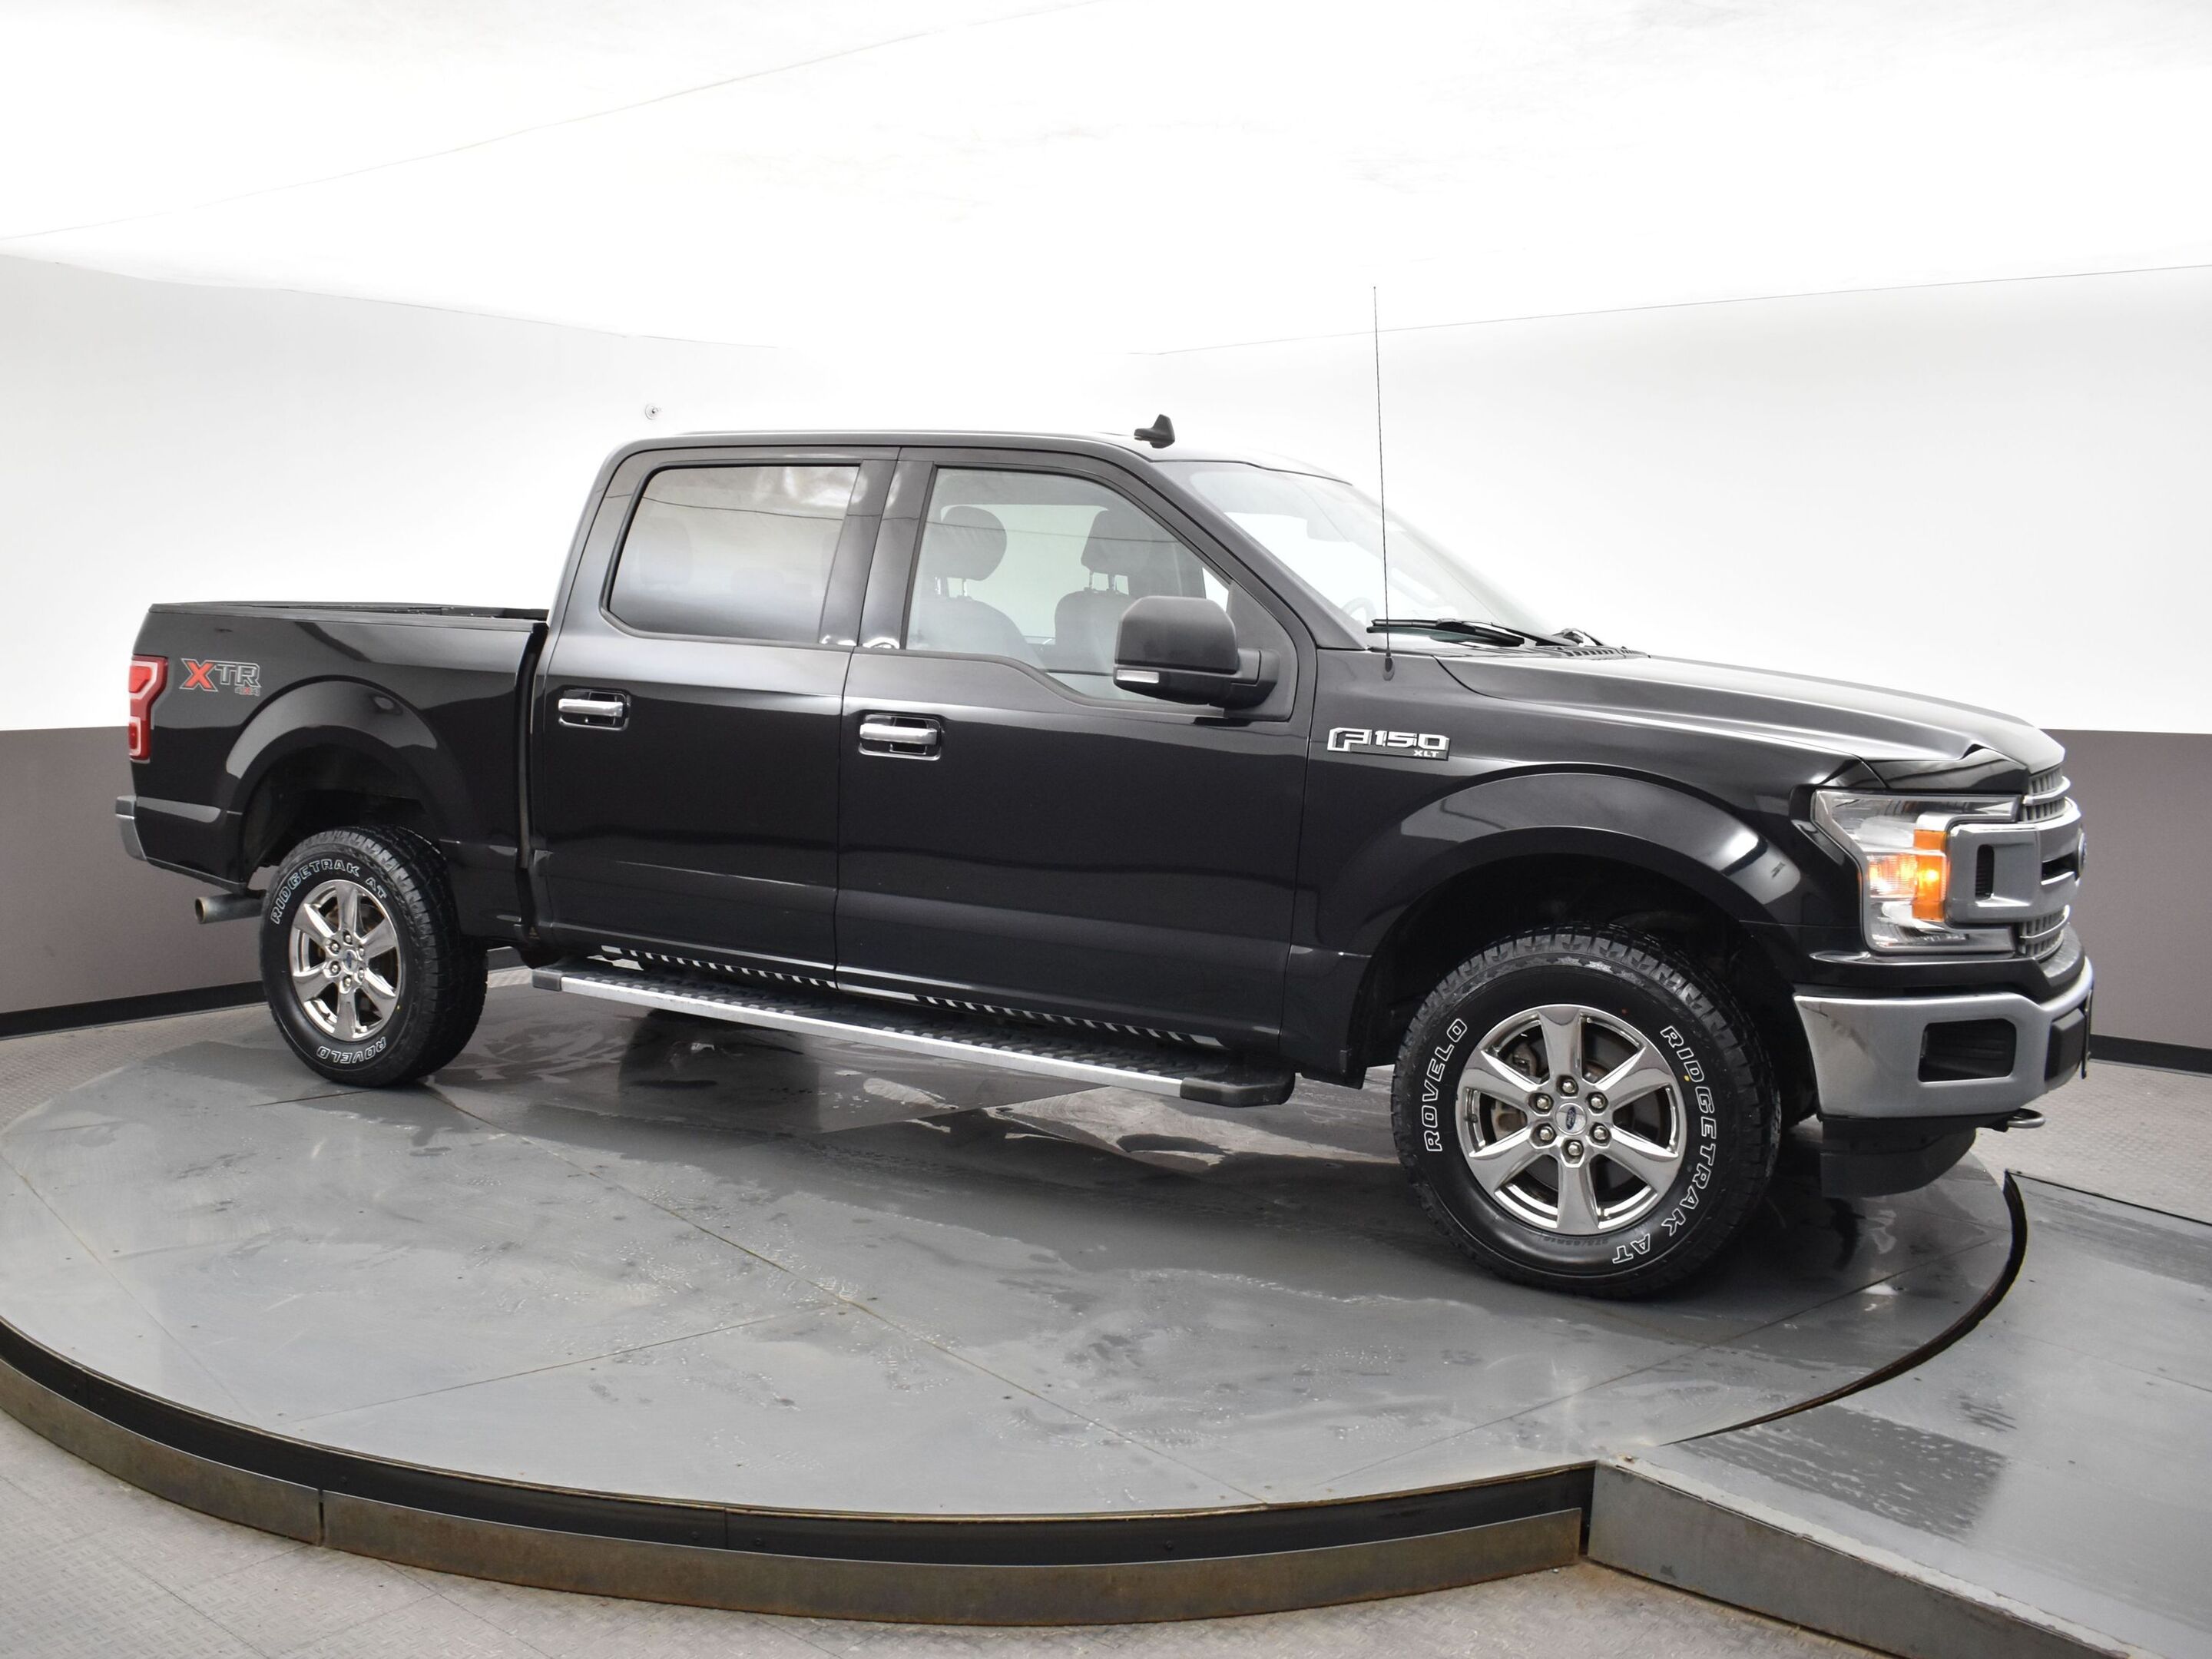 2019 Ford F-150 XLT WITH 4X4, TRAILER HITCH, TOW HOOKS, SMARTPHONE